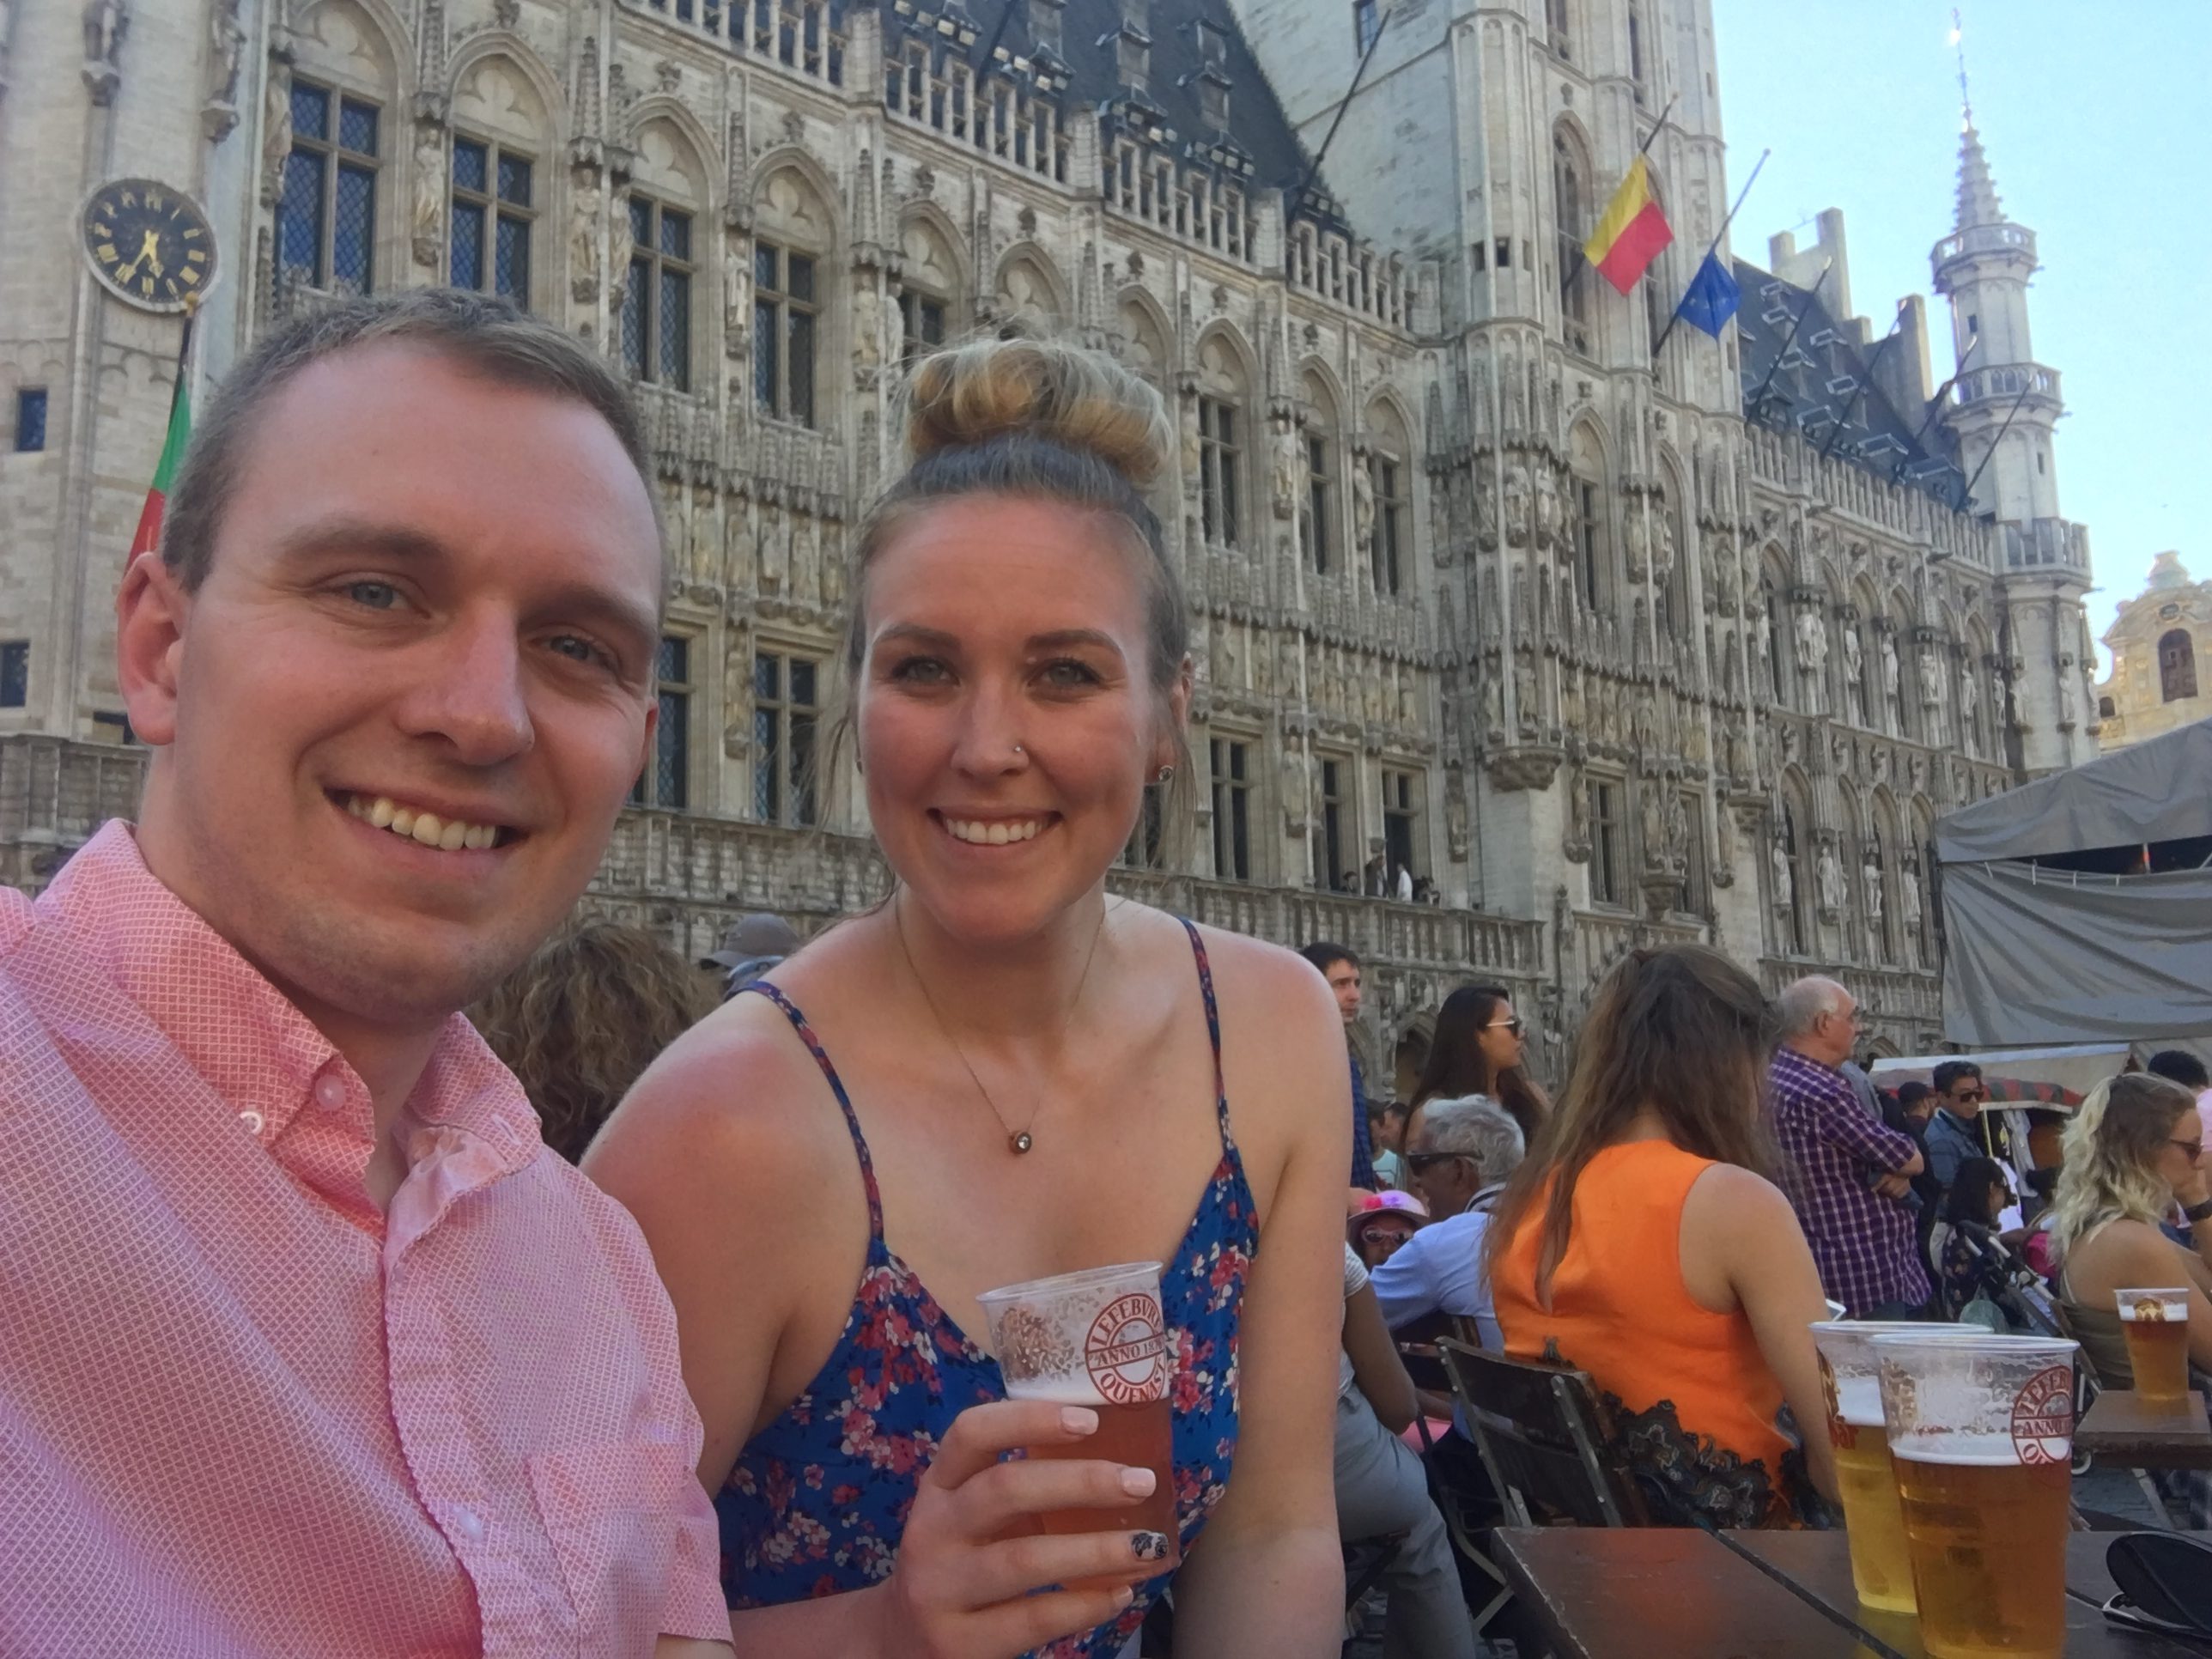 Ben and Erinn at the Grand-Place in Brussels, Belgium.